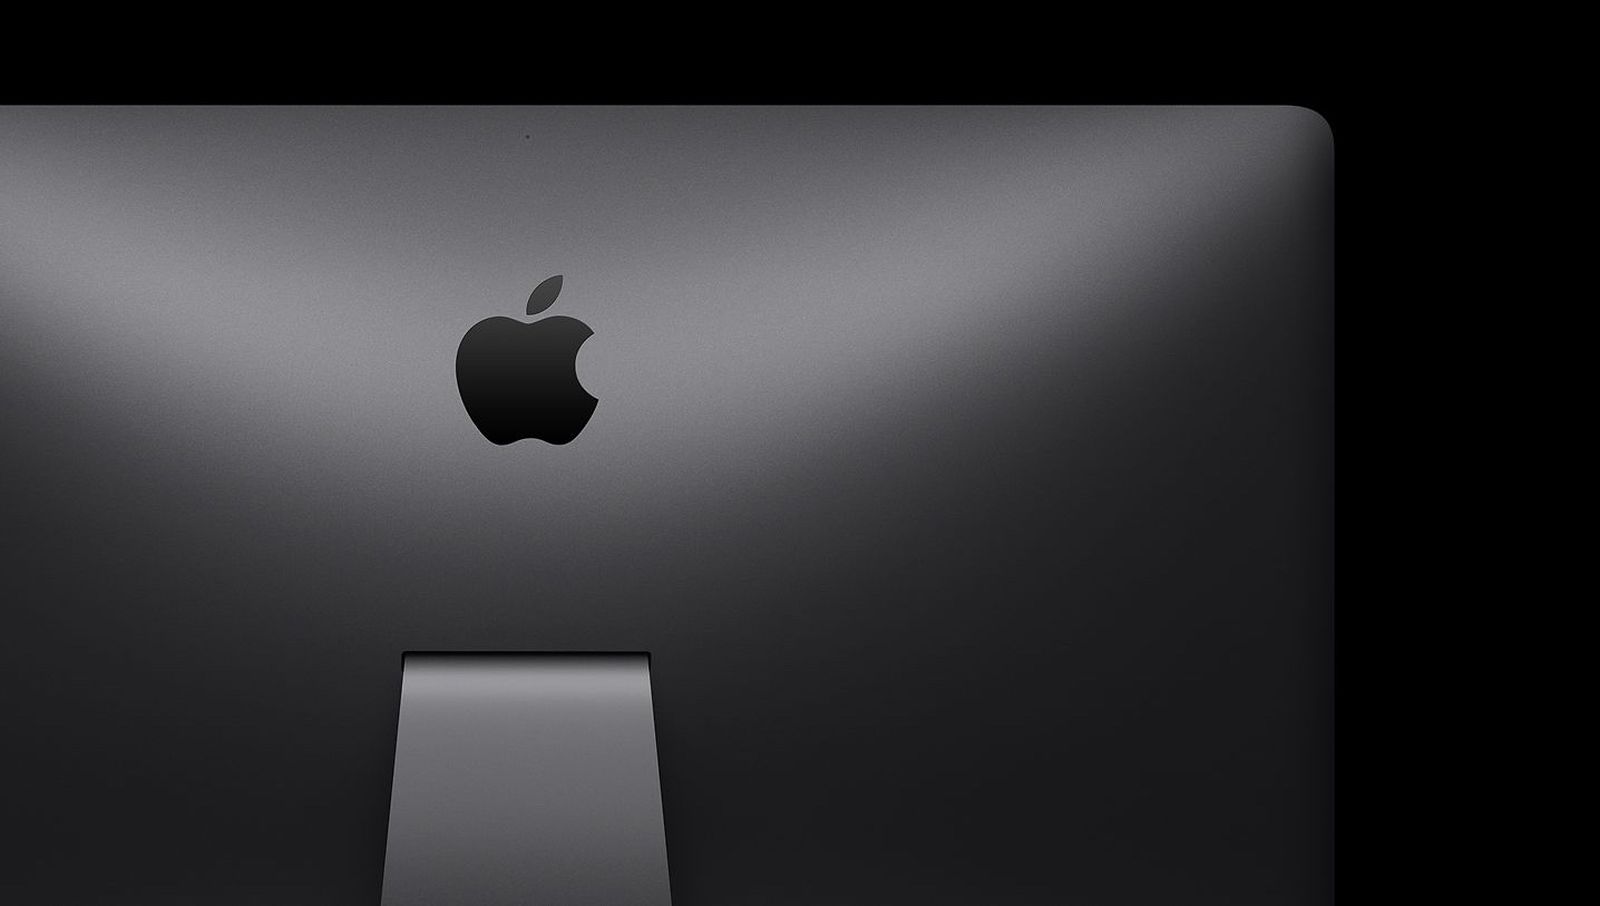 Apple confirms iMac Pro will be discontinued when supplies run out, recommends a 27-inch iMac